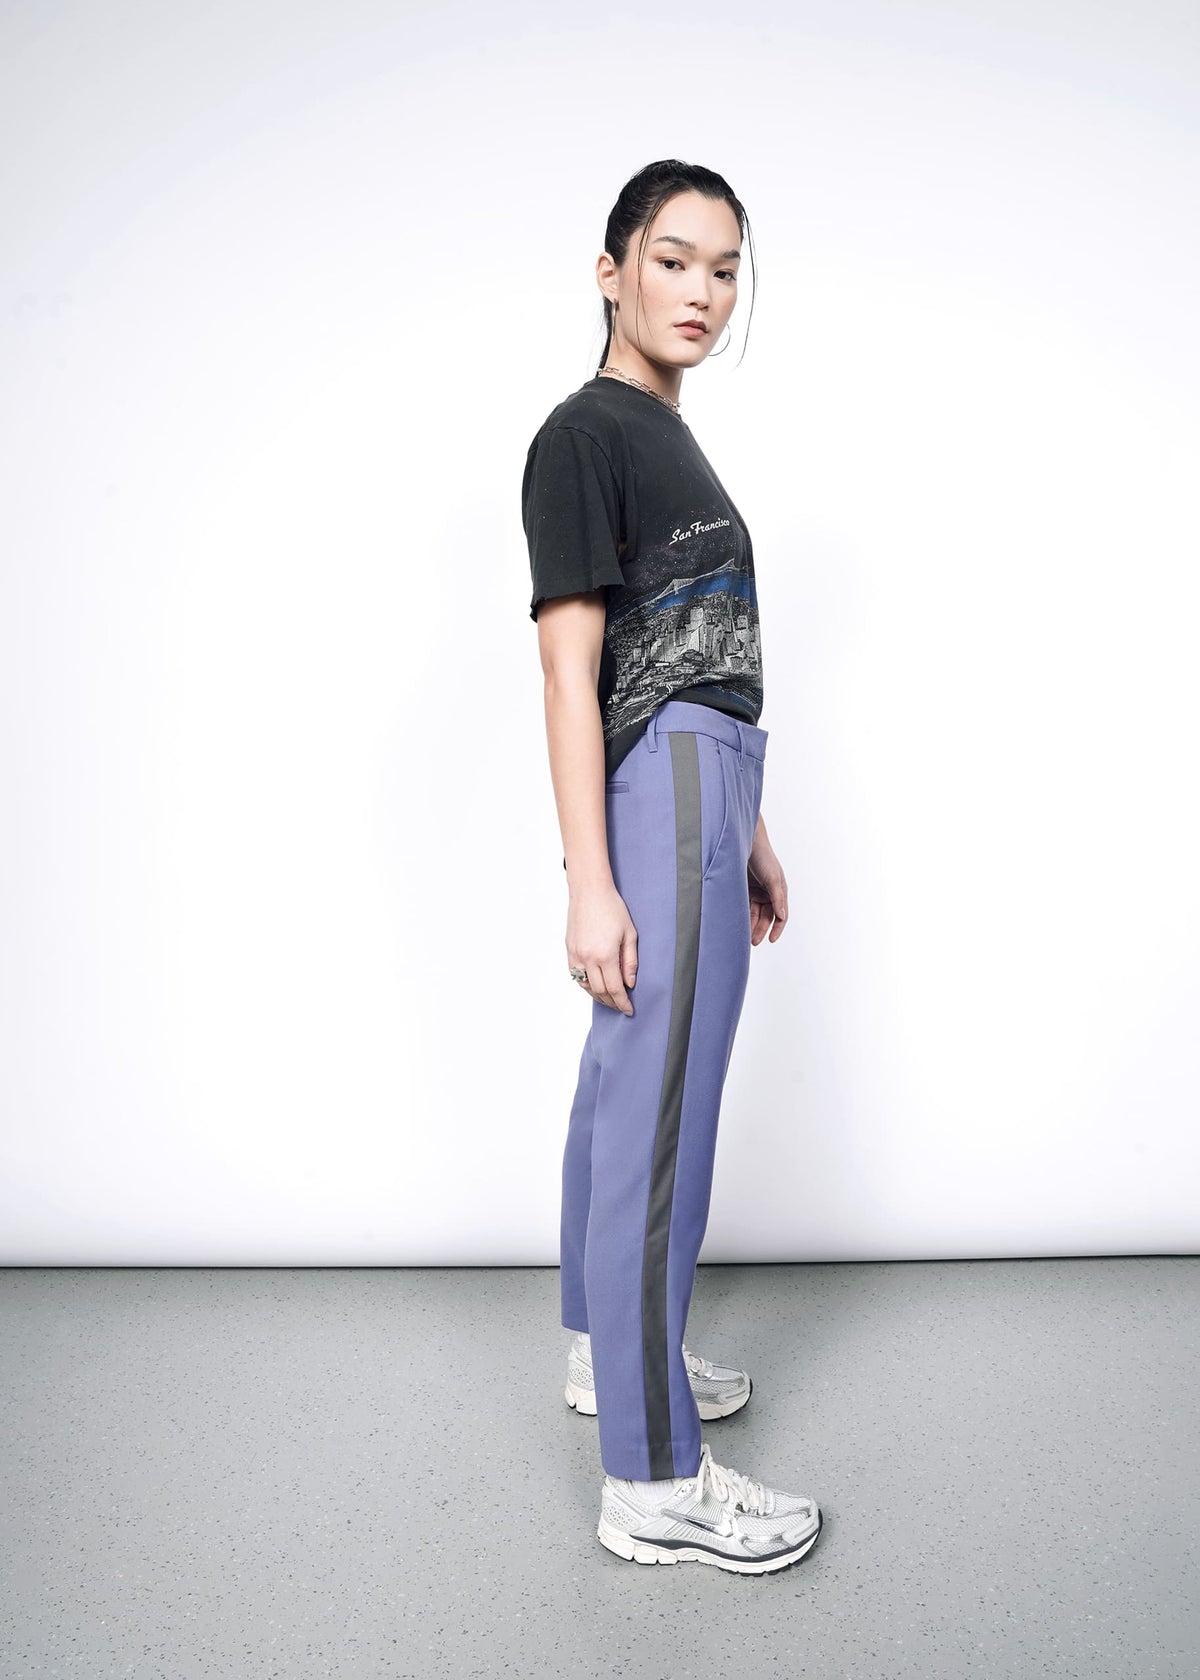 The Empower Colorblock Slim Crop Pant in Blueberry / Charcoal